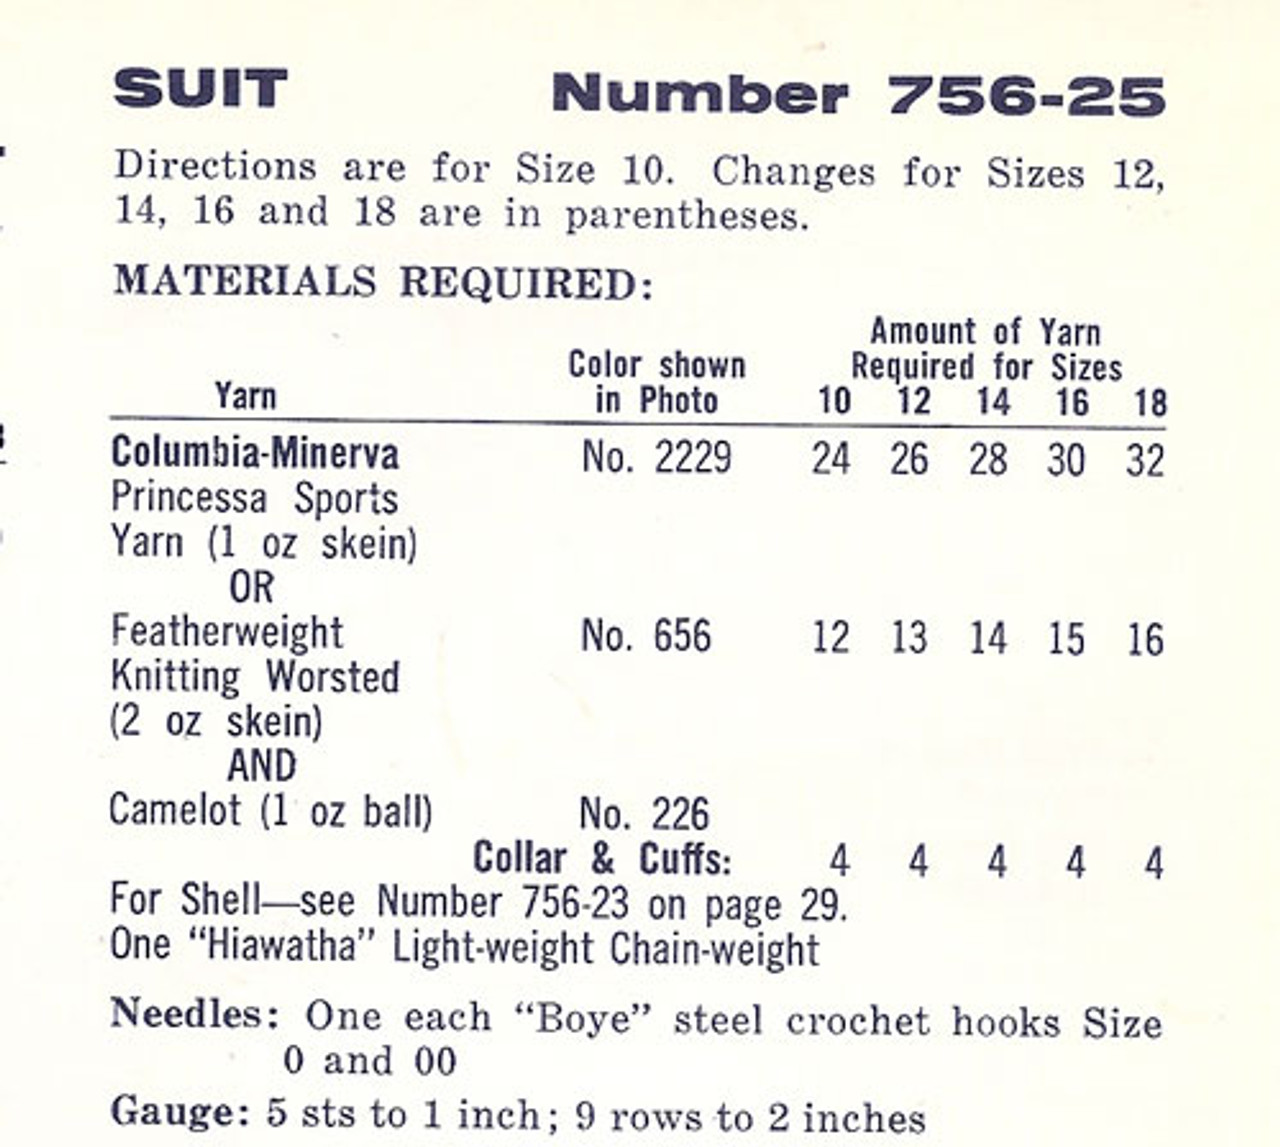 Crochet Material Requirements for suit